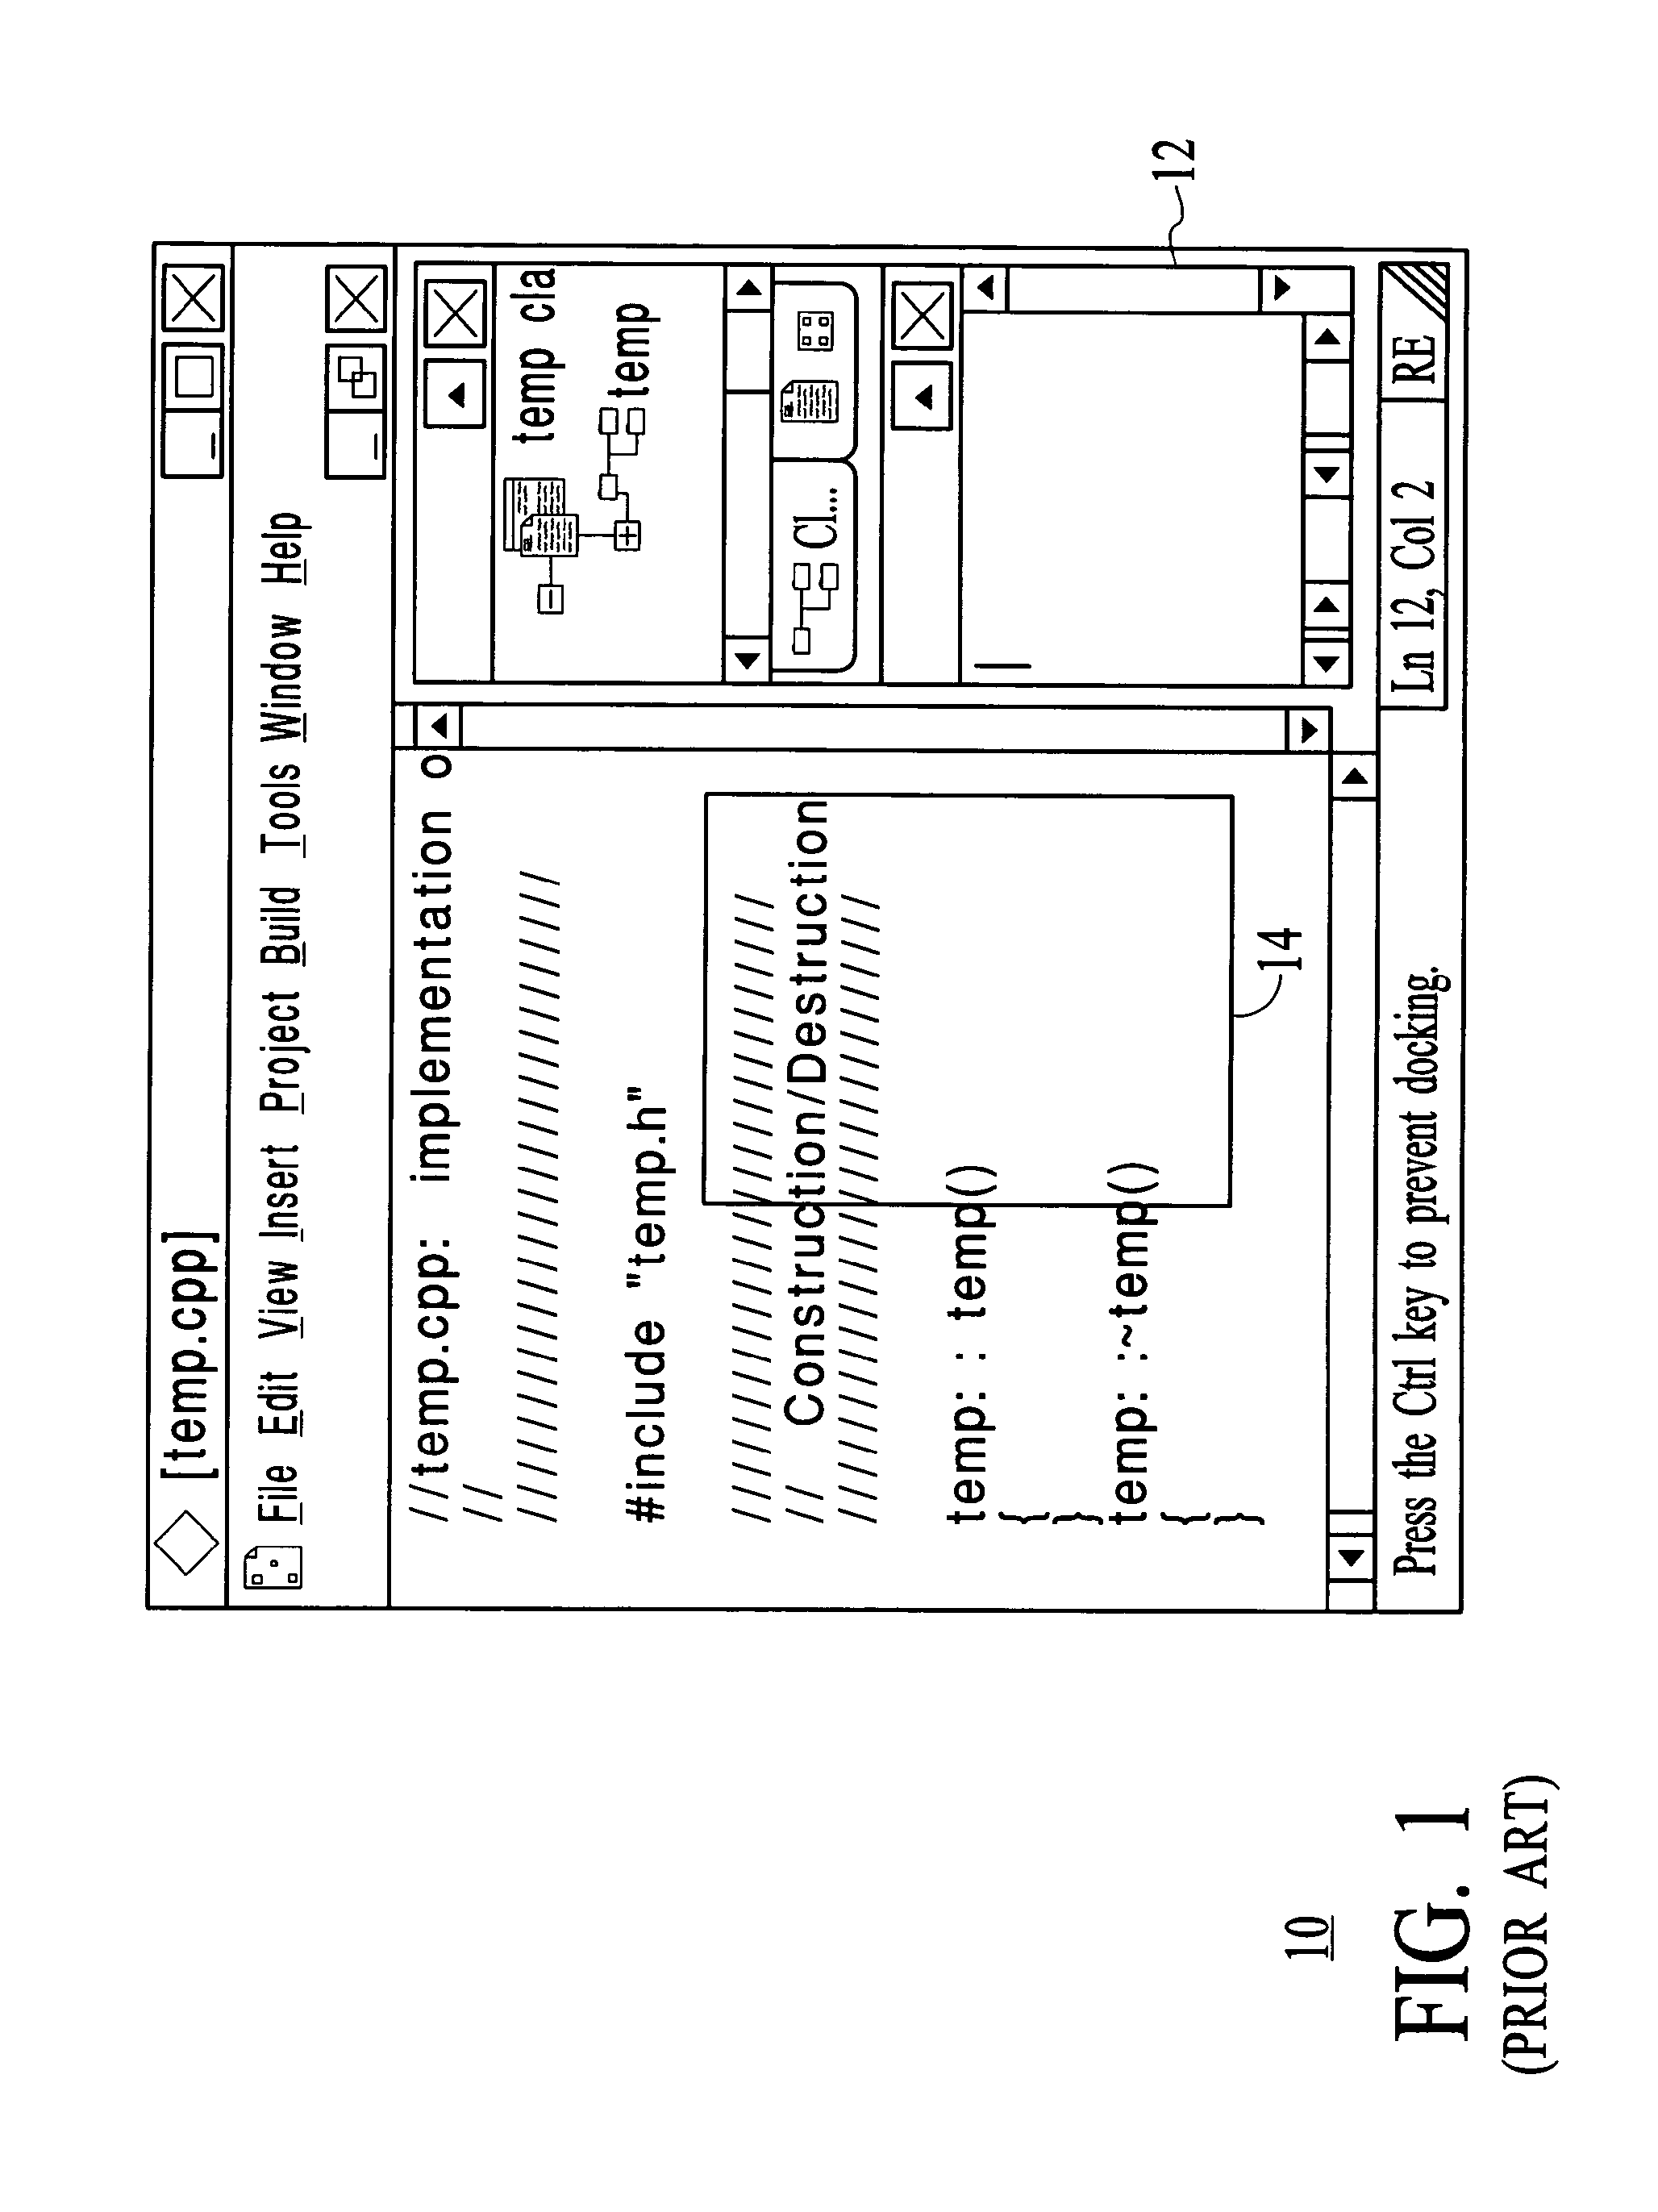 Method and system for providing feedback for docking a content pane in a host window